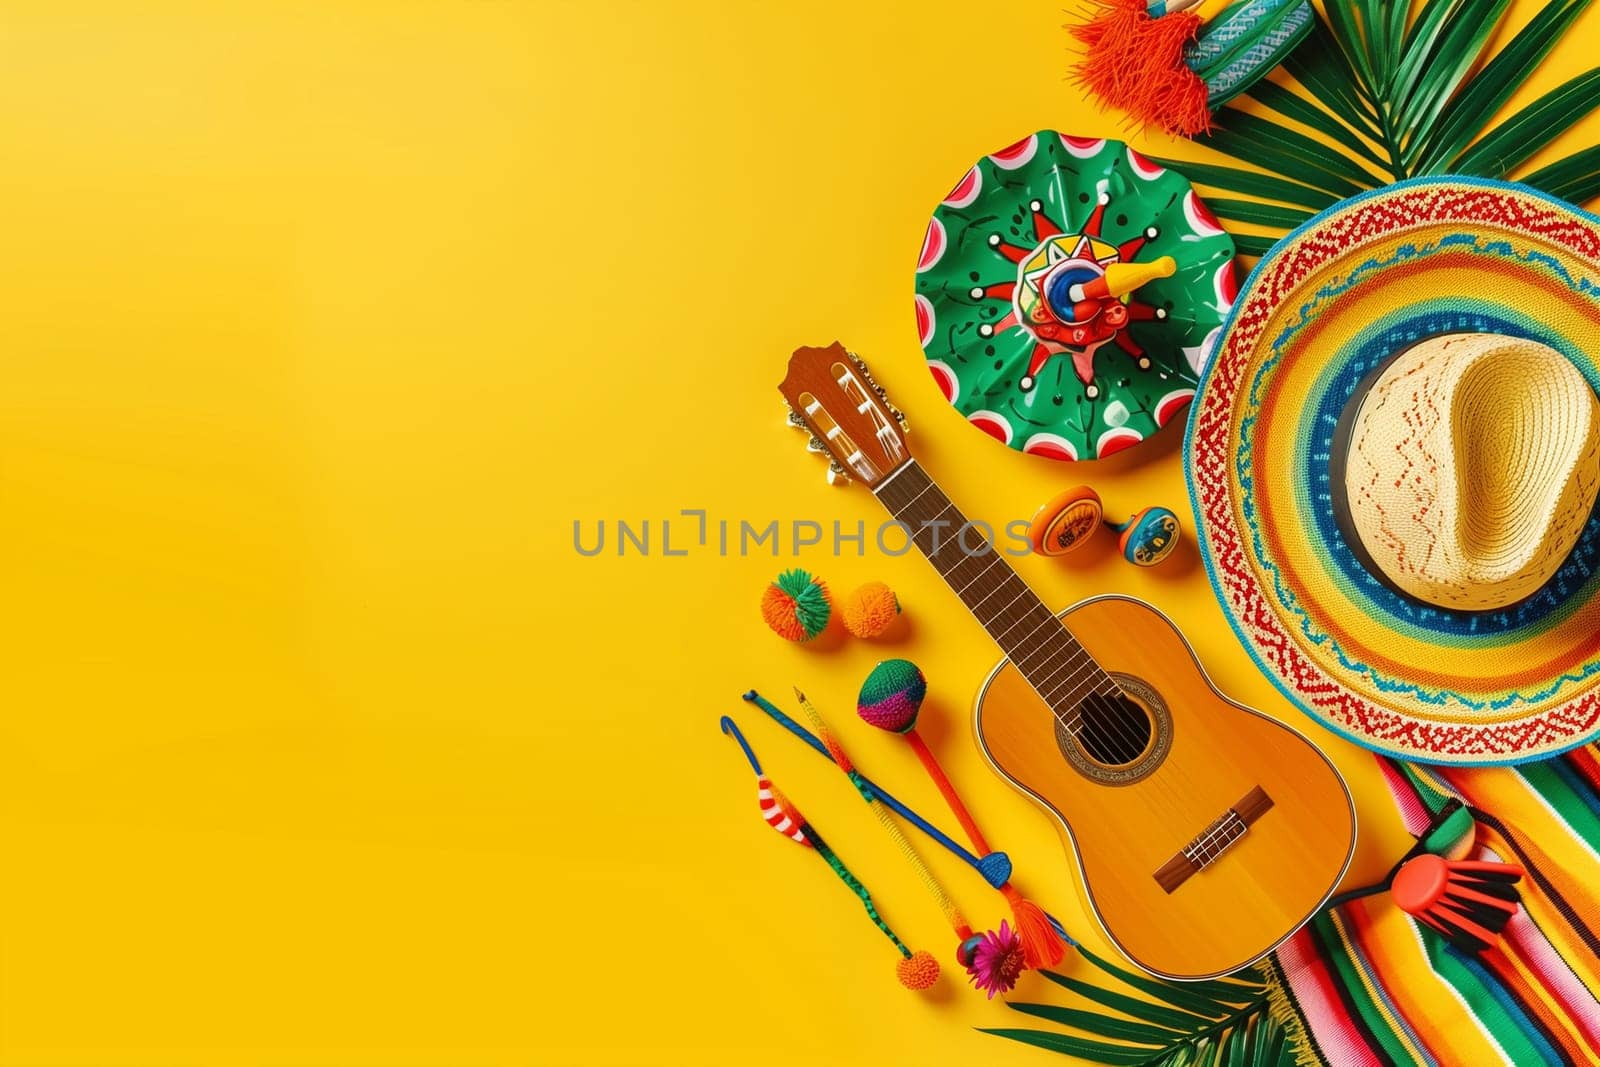 Guitar, Mexican Sombrero, and Various Items on Yellow Background by Sd28DimoN_1976